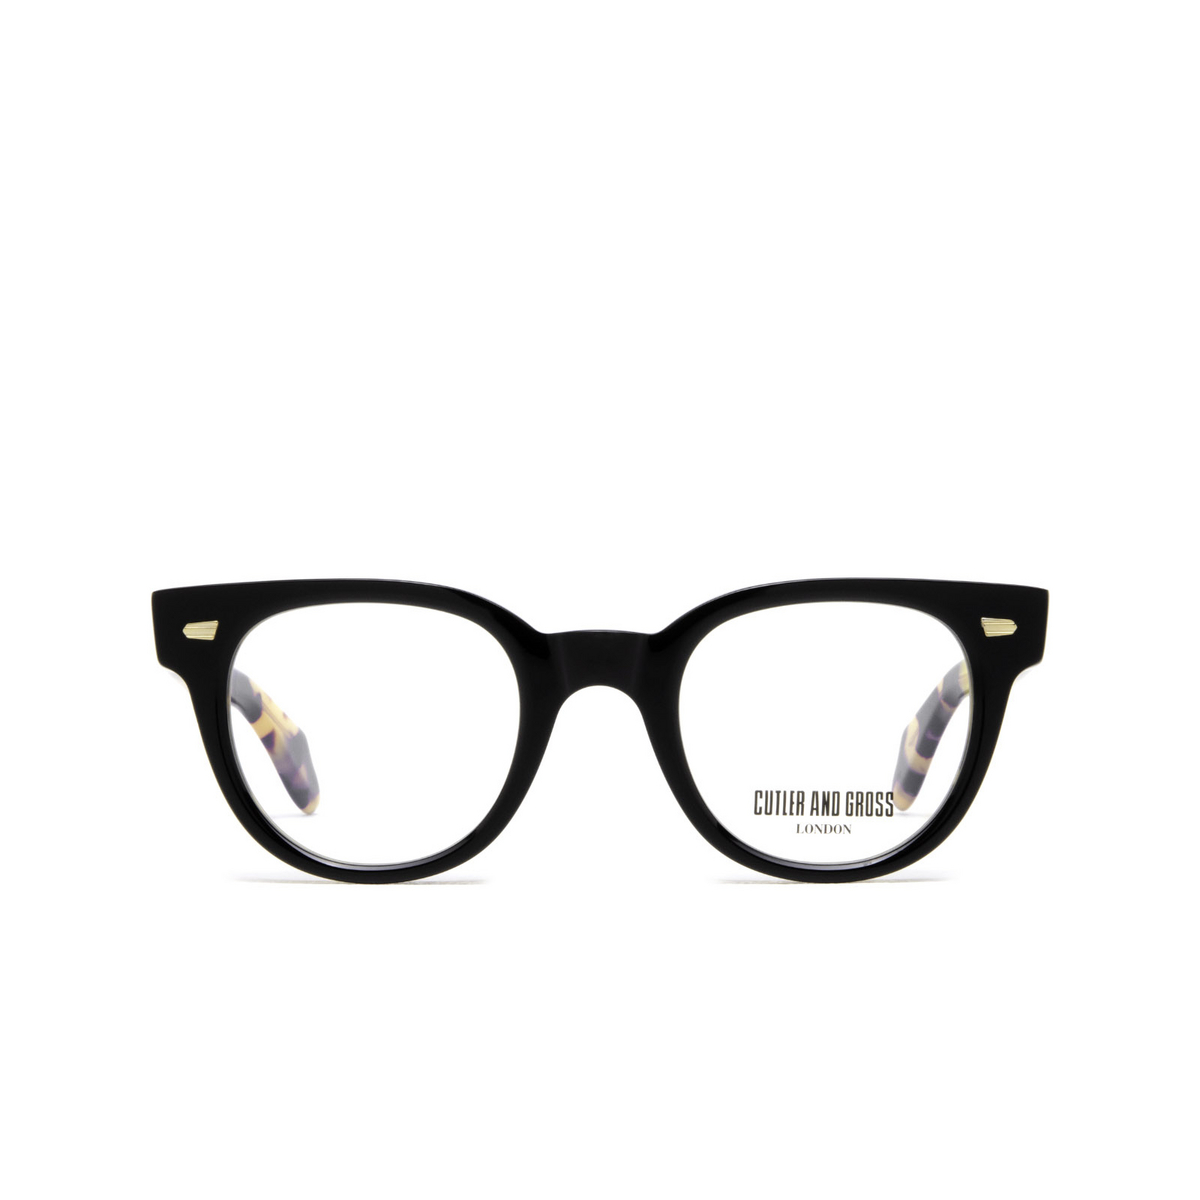 Cutler and Gross 1392 Eyeglasses 01 Black on Camo - front view